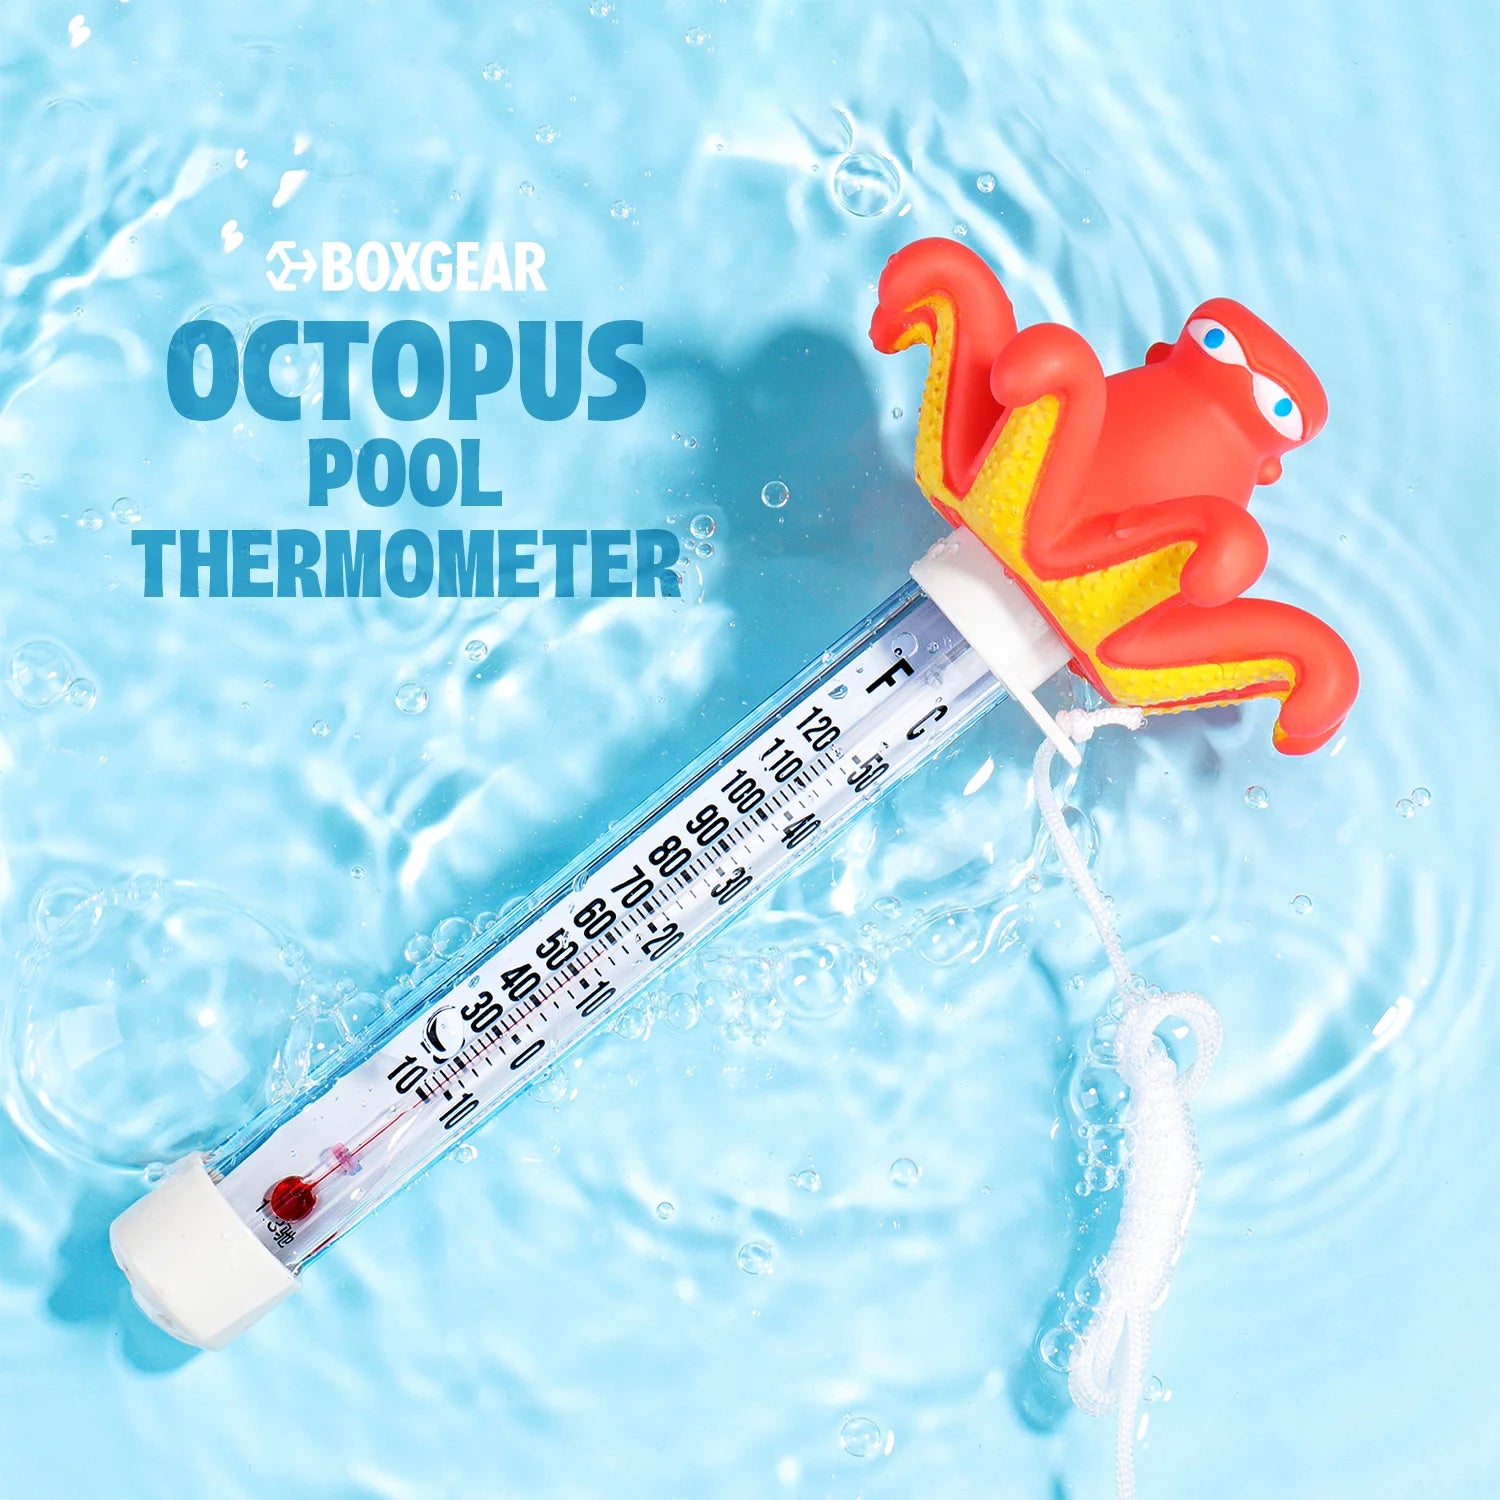 Boxgear Octopus Floating Pool Thermometer - Aquarium Thermometer Water Temperature from -10 to 50°C - Shatter Proof Pool Thermometer Floater with Tether for Outdoor & Indoor Swimming Pools, Ponds